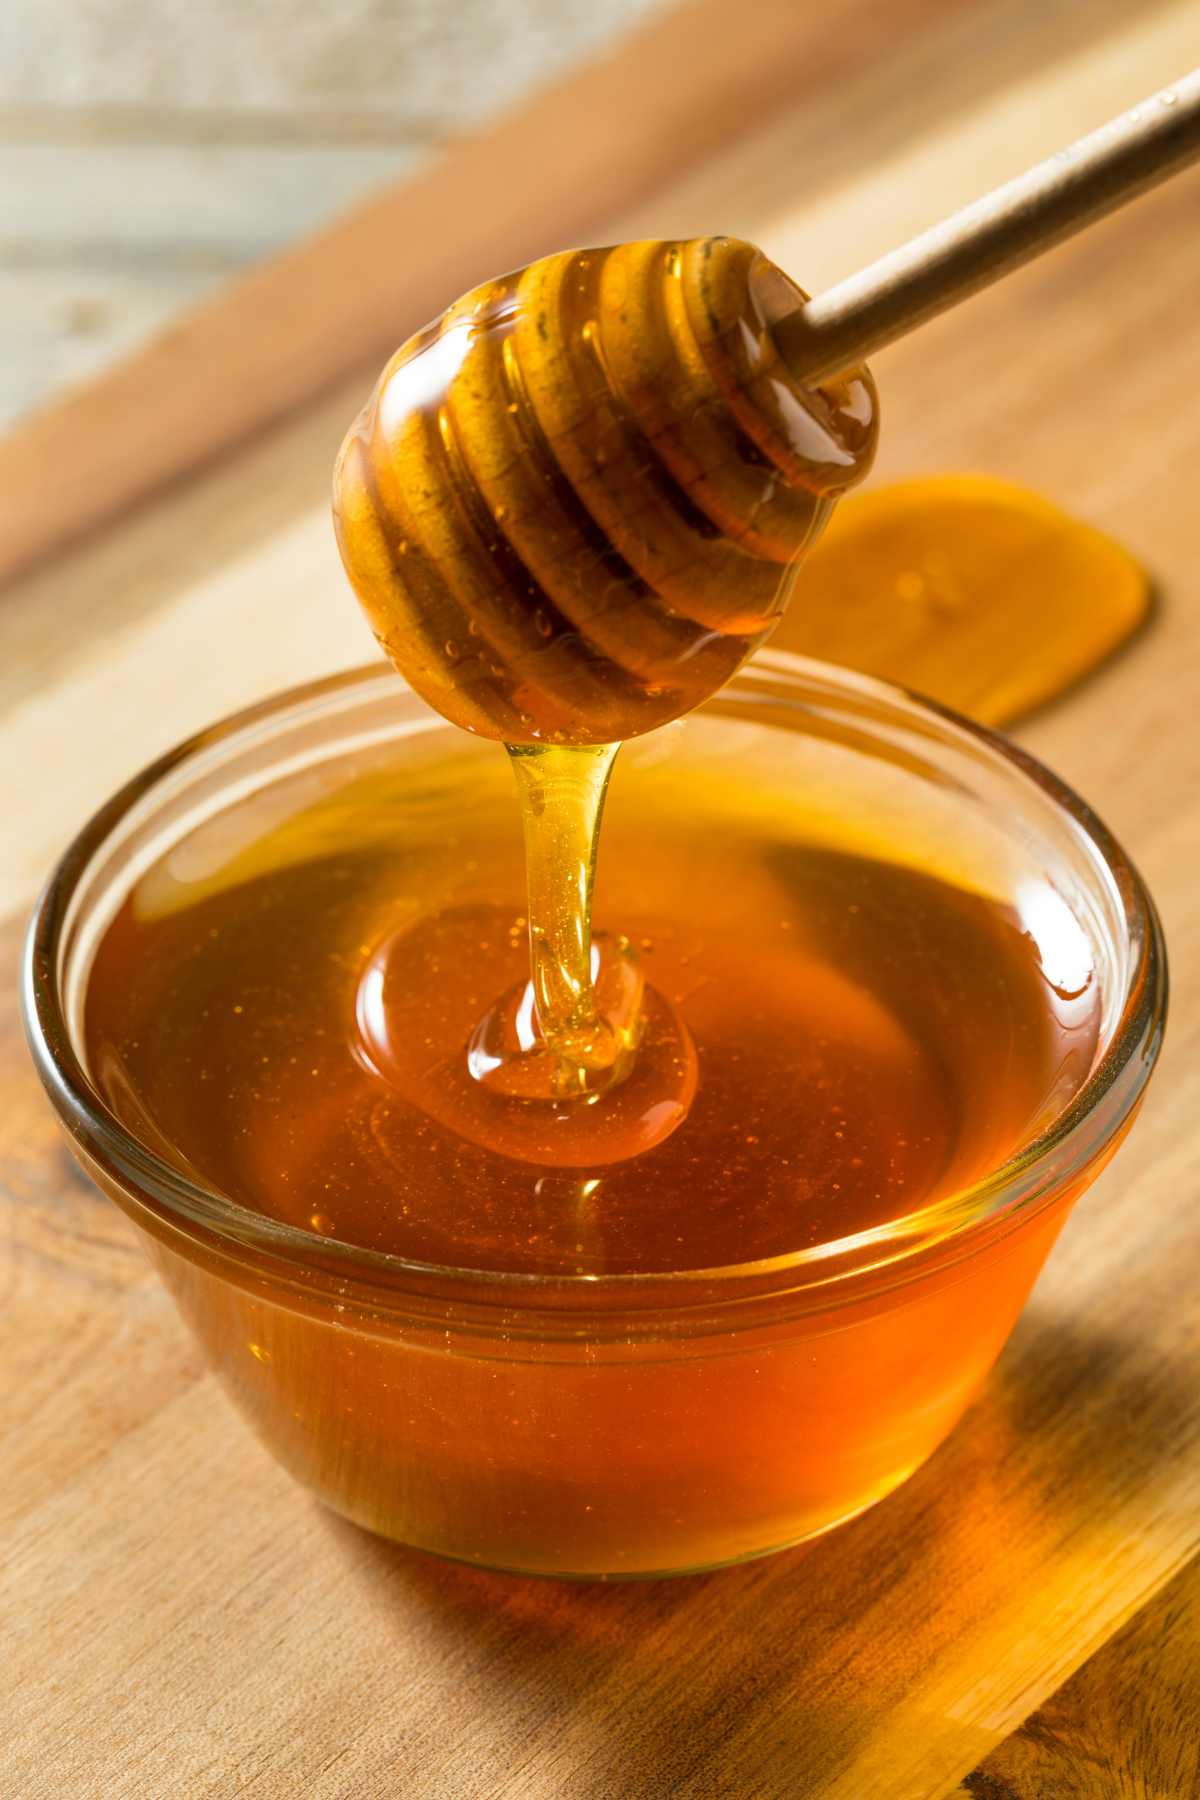 Much like sugar, honey is high in carbs. Does that mean it’s completely off-limits on a keto diet? Read on to find out all about honey and how it may work with your new keto lifestyle.